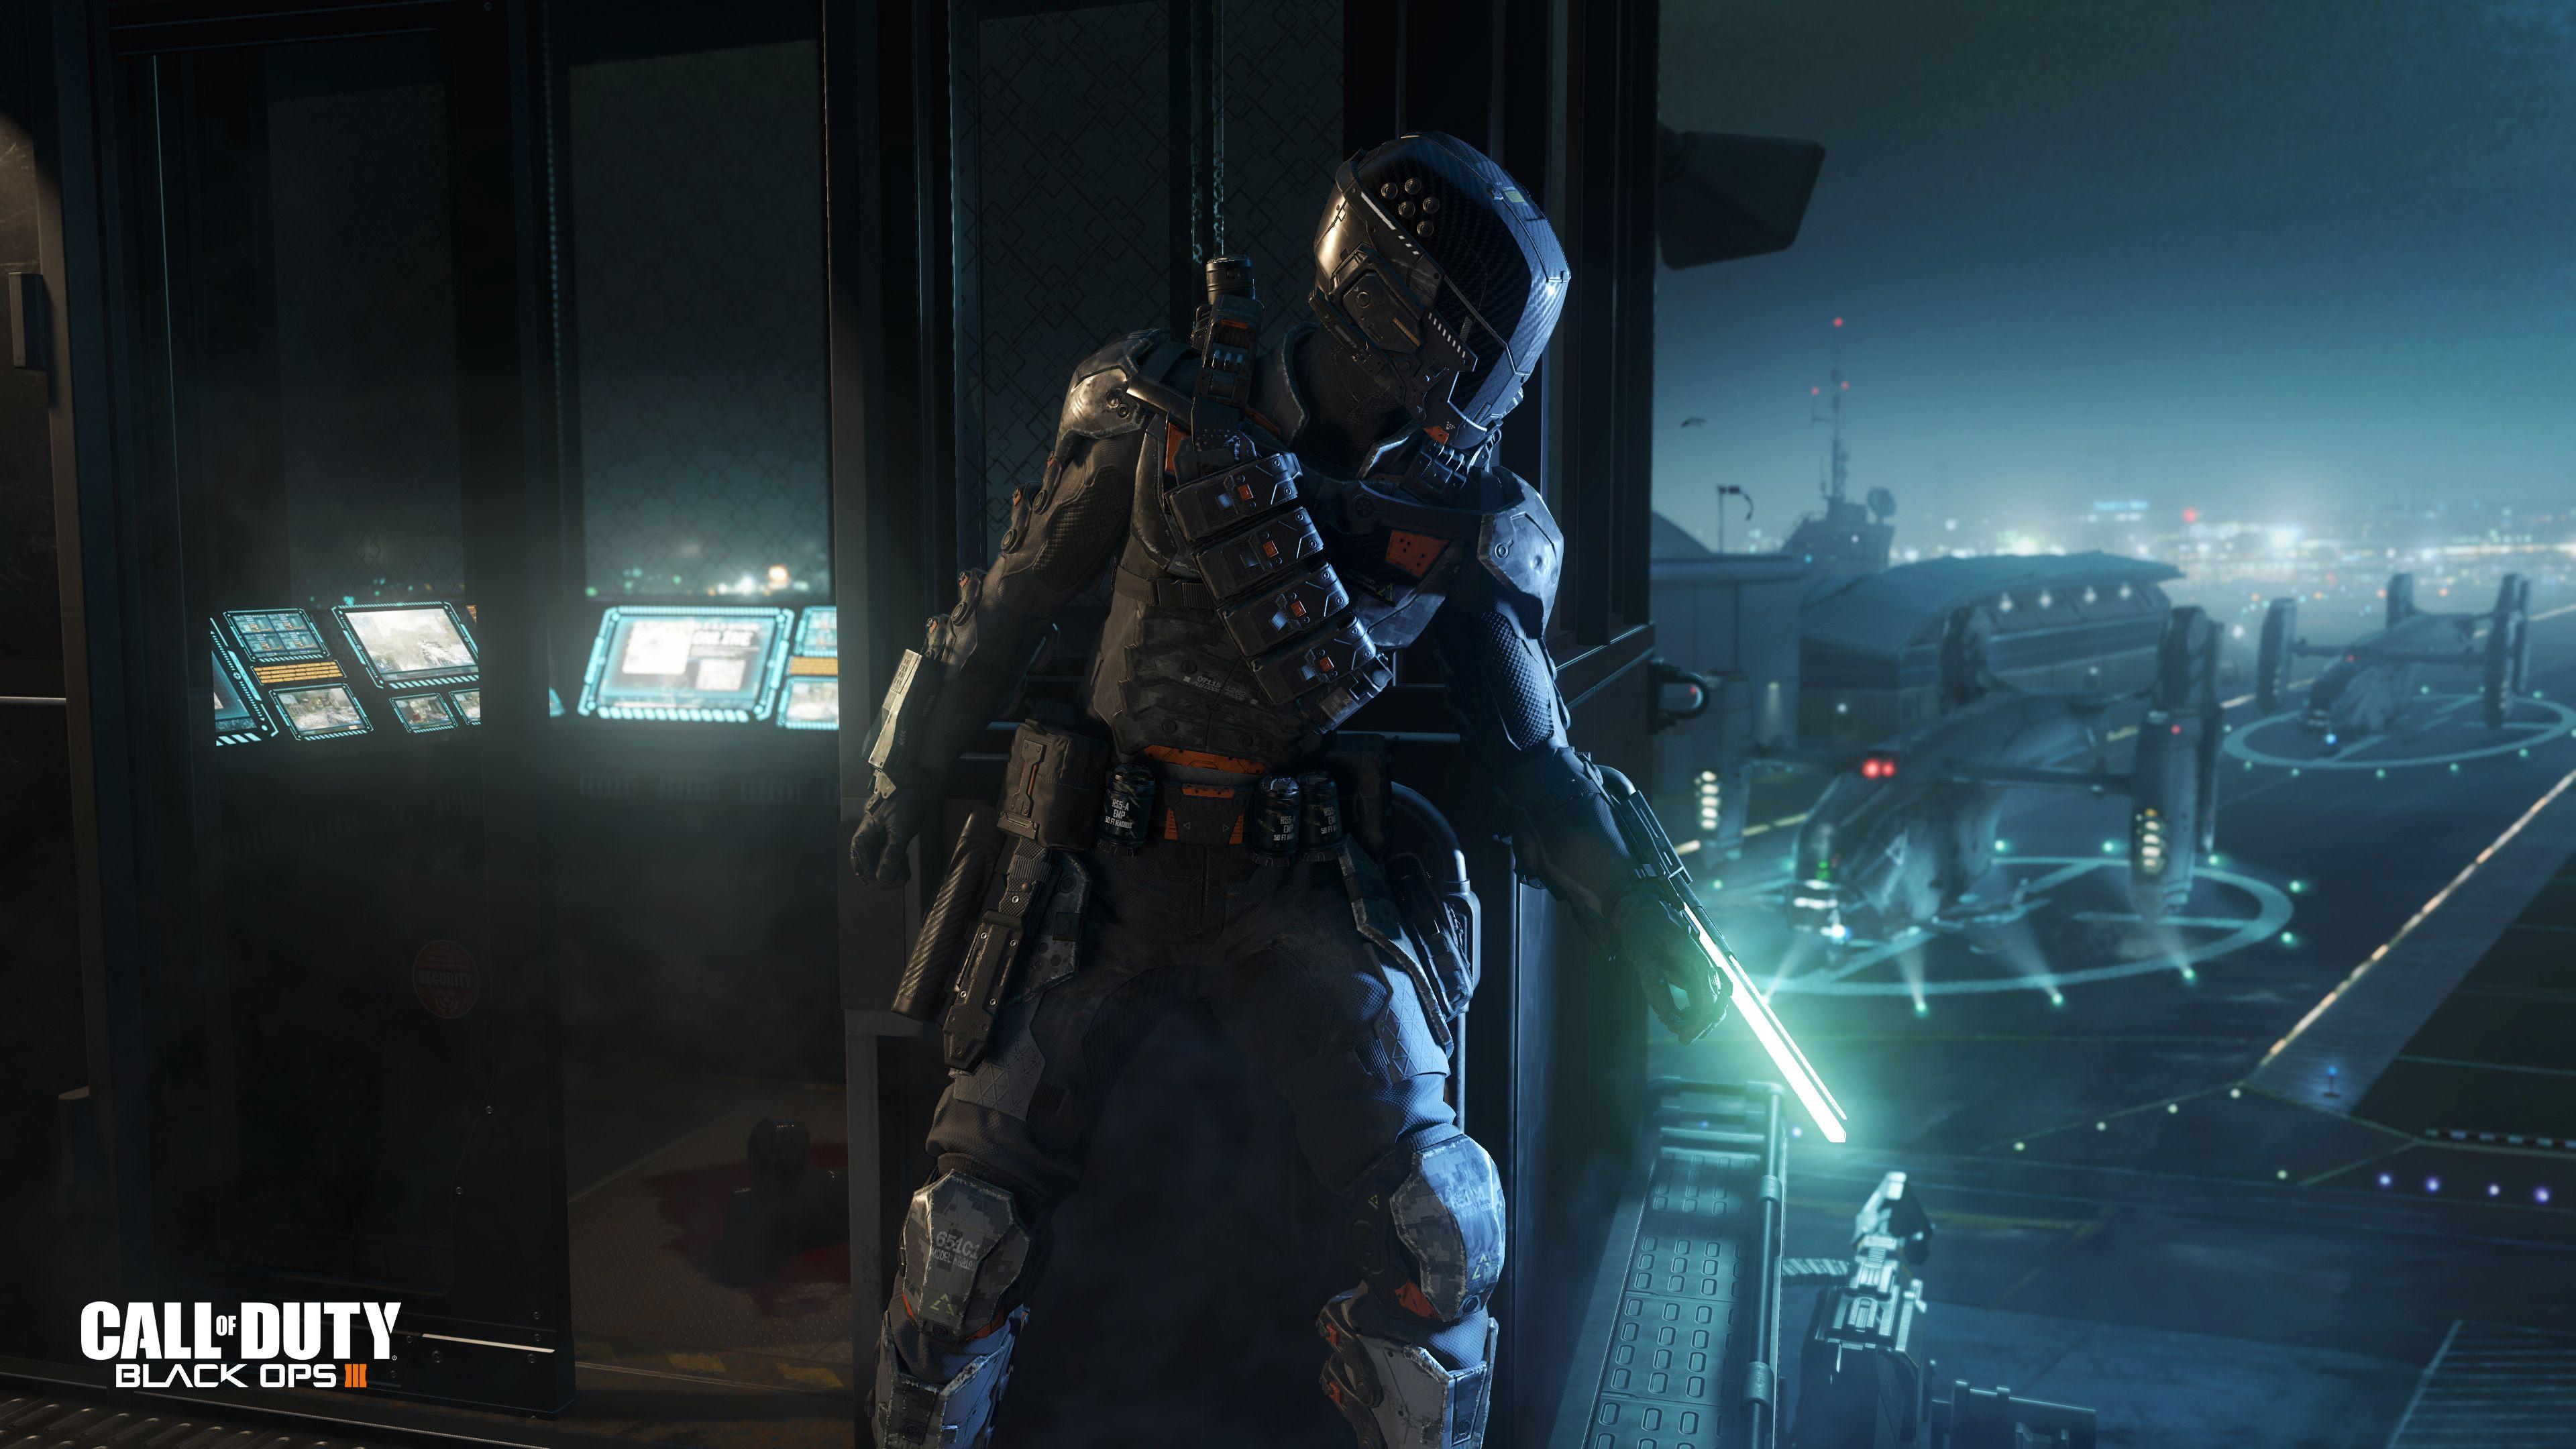 Free MP weekend for Call of Duty: Black Ops 3 on PC starts now, ends